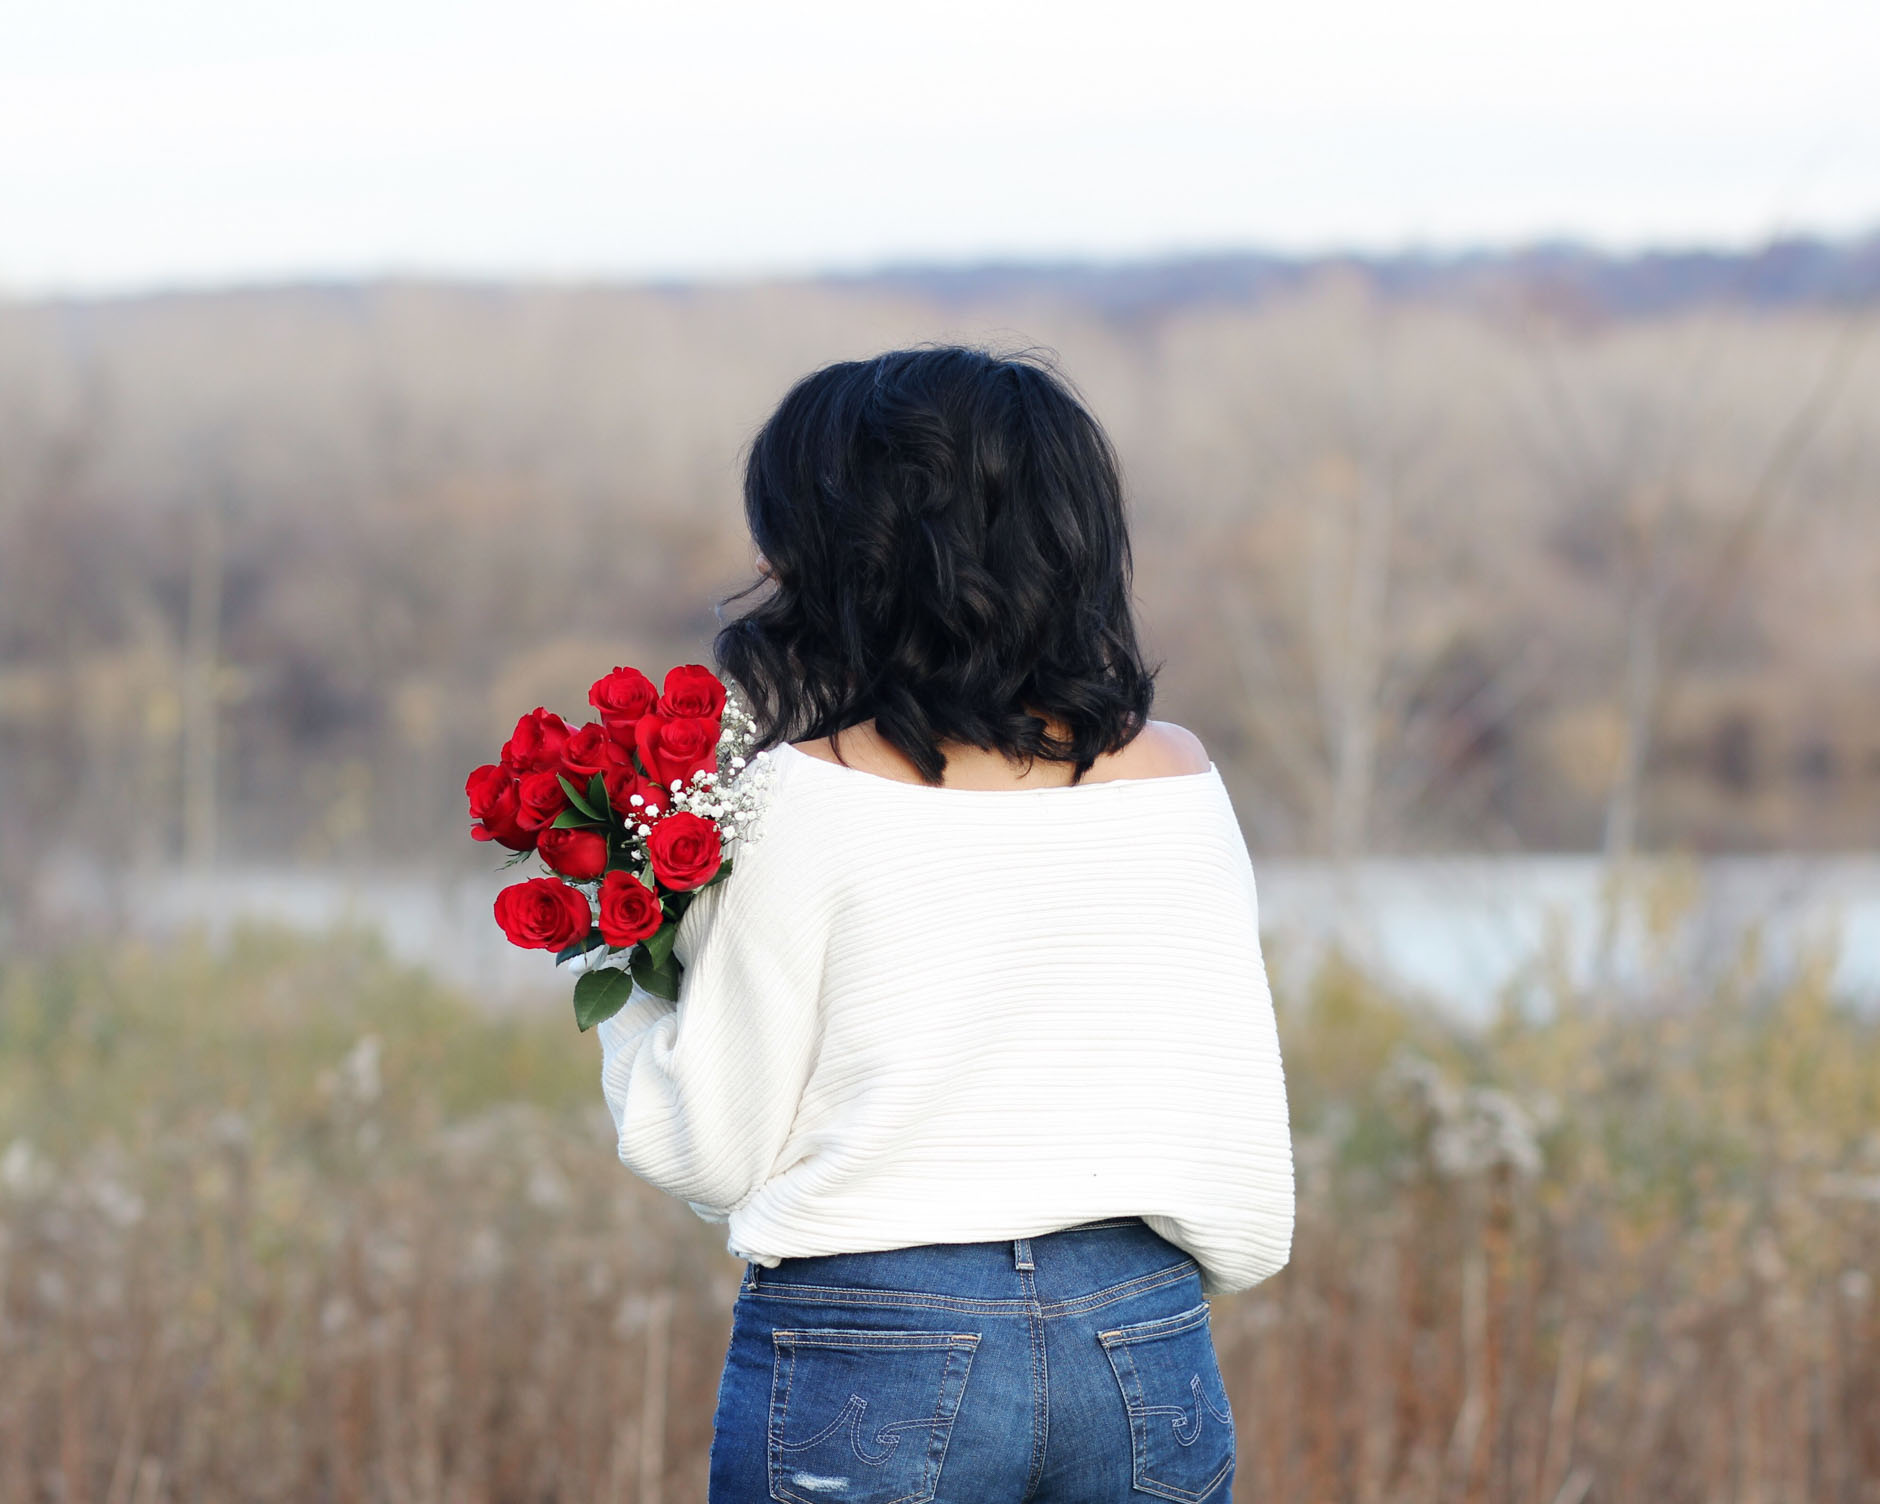 lifestyle blogger naty michele holding red roses 